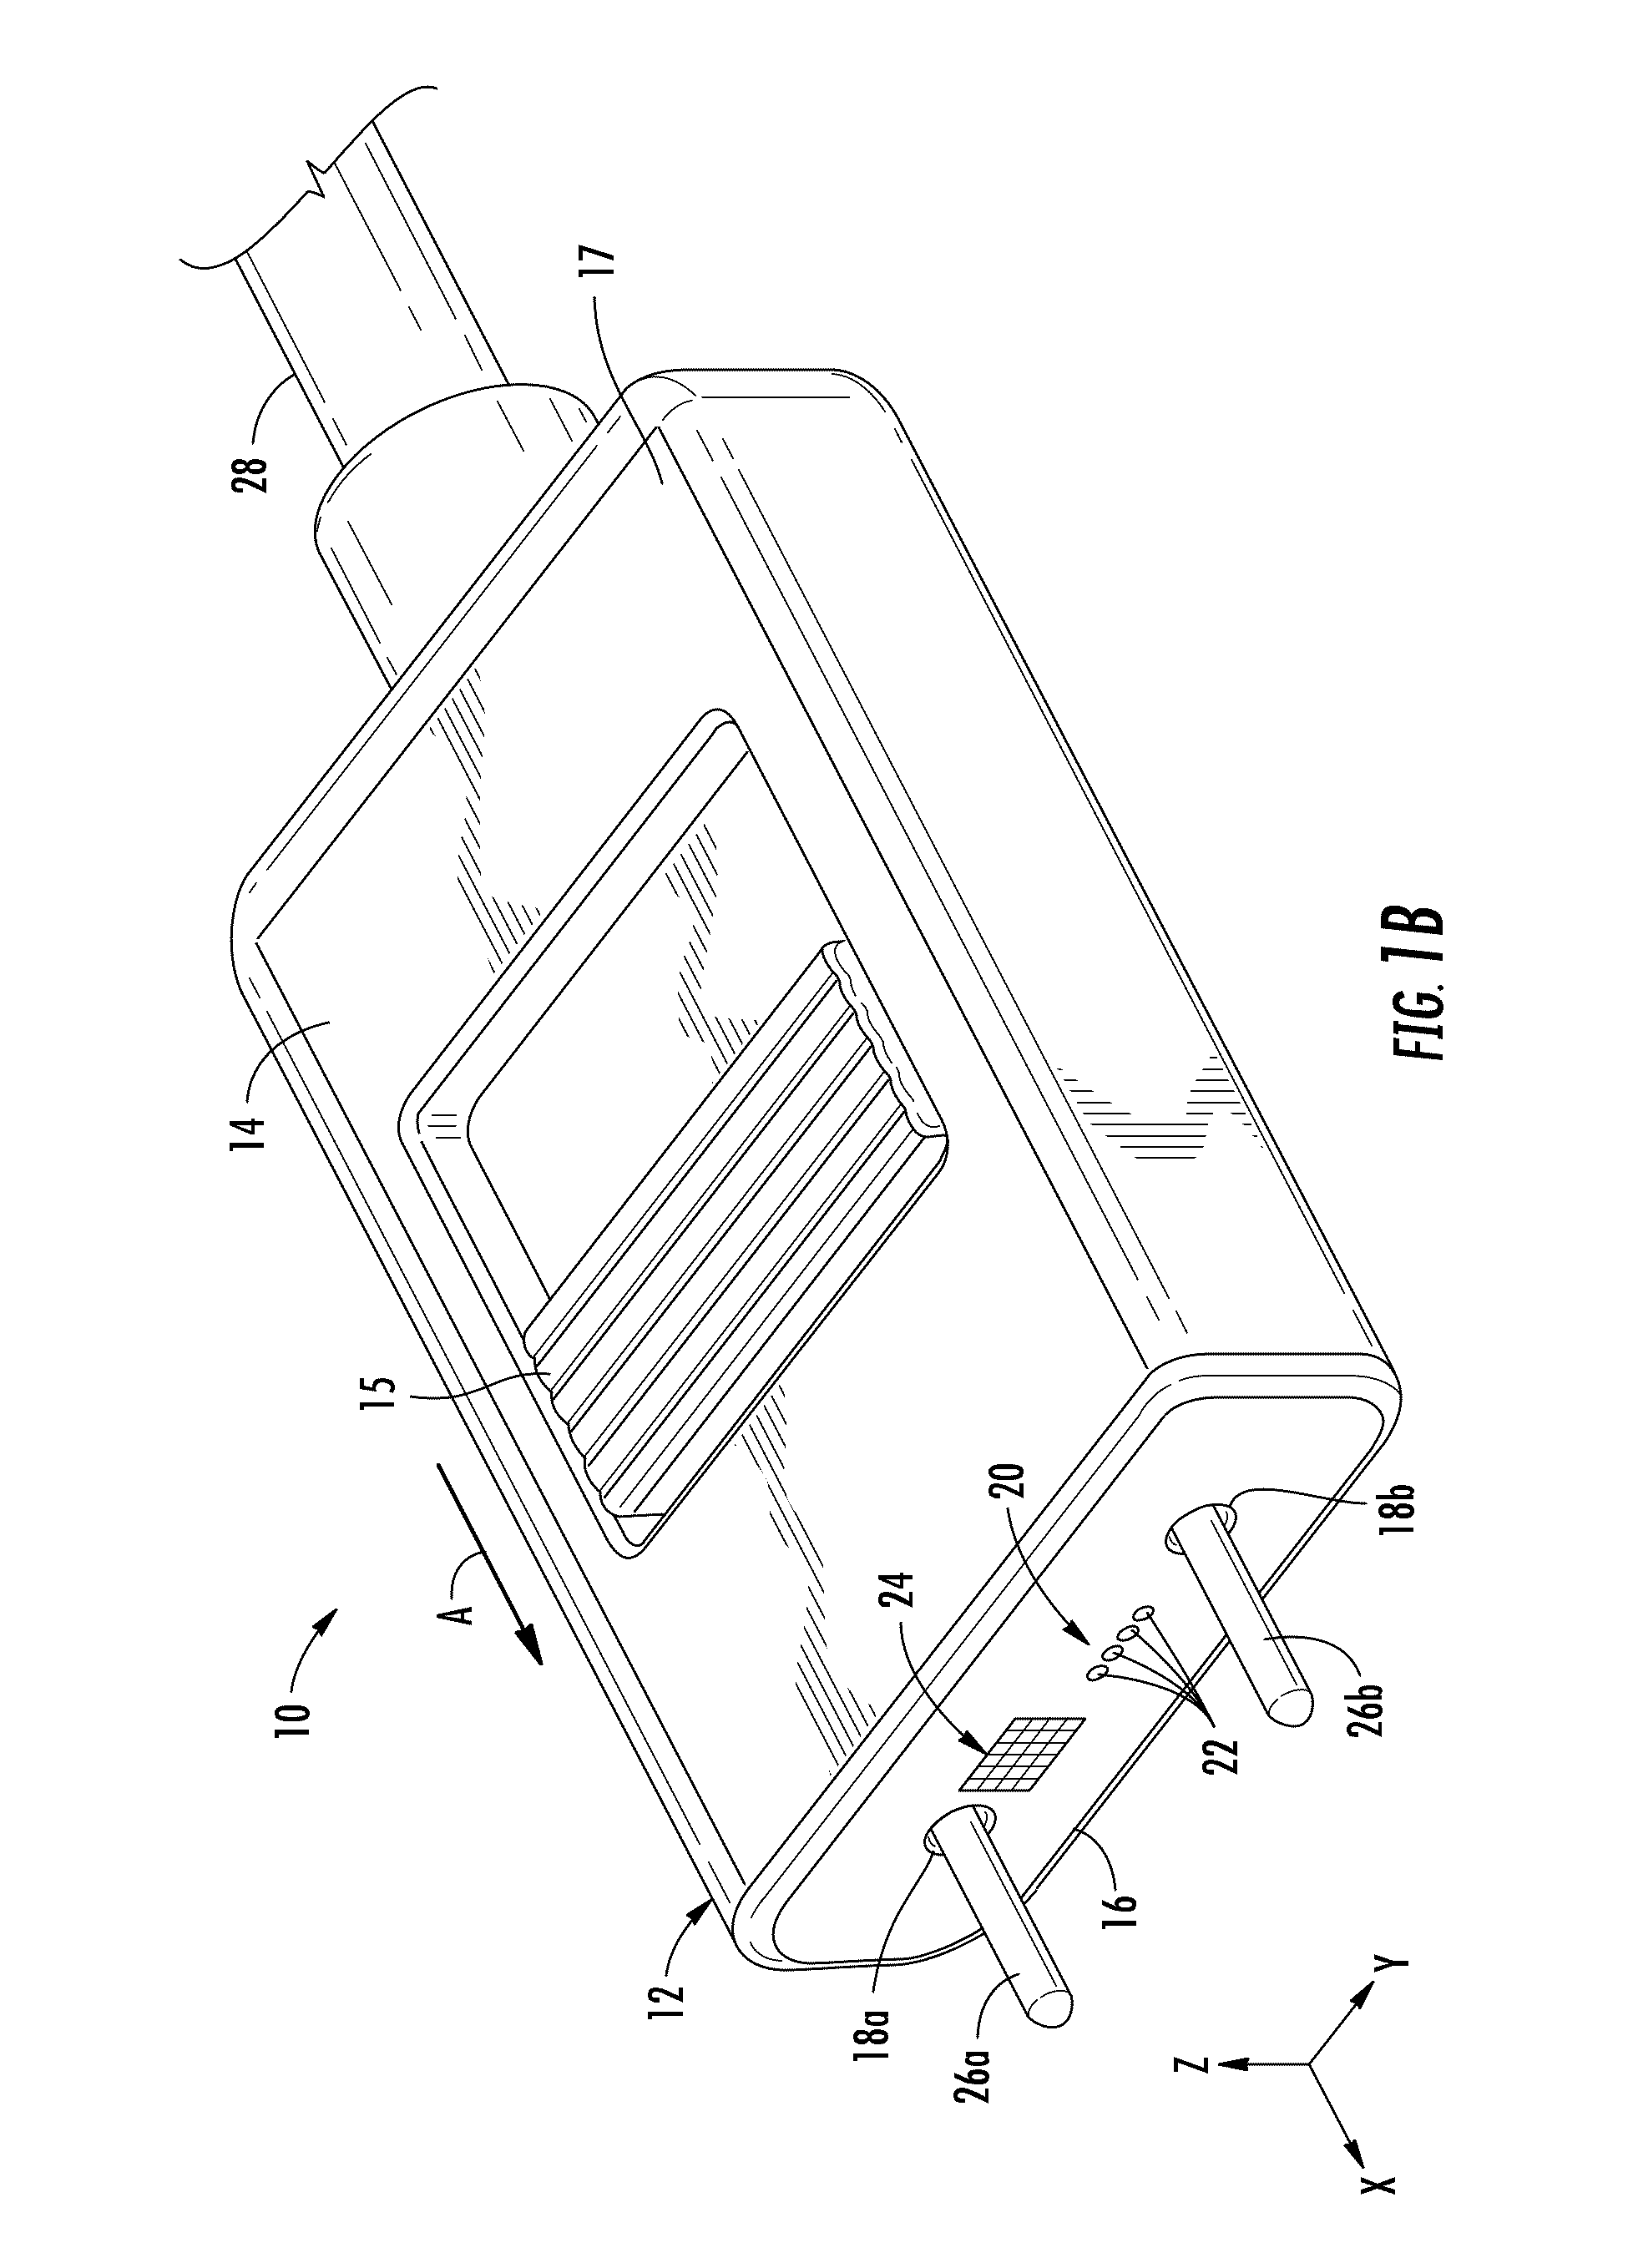 Optical connector assemblies having alignment components